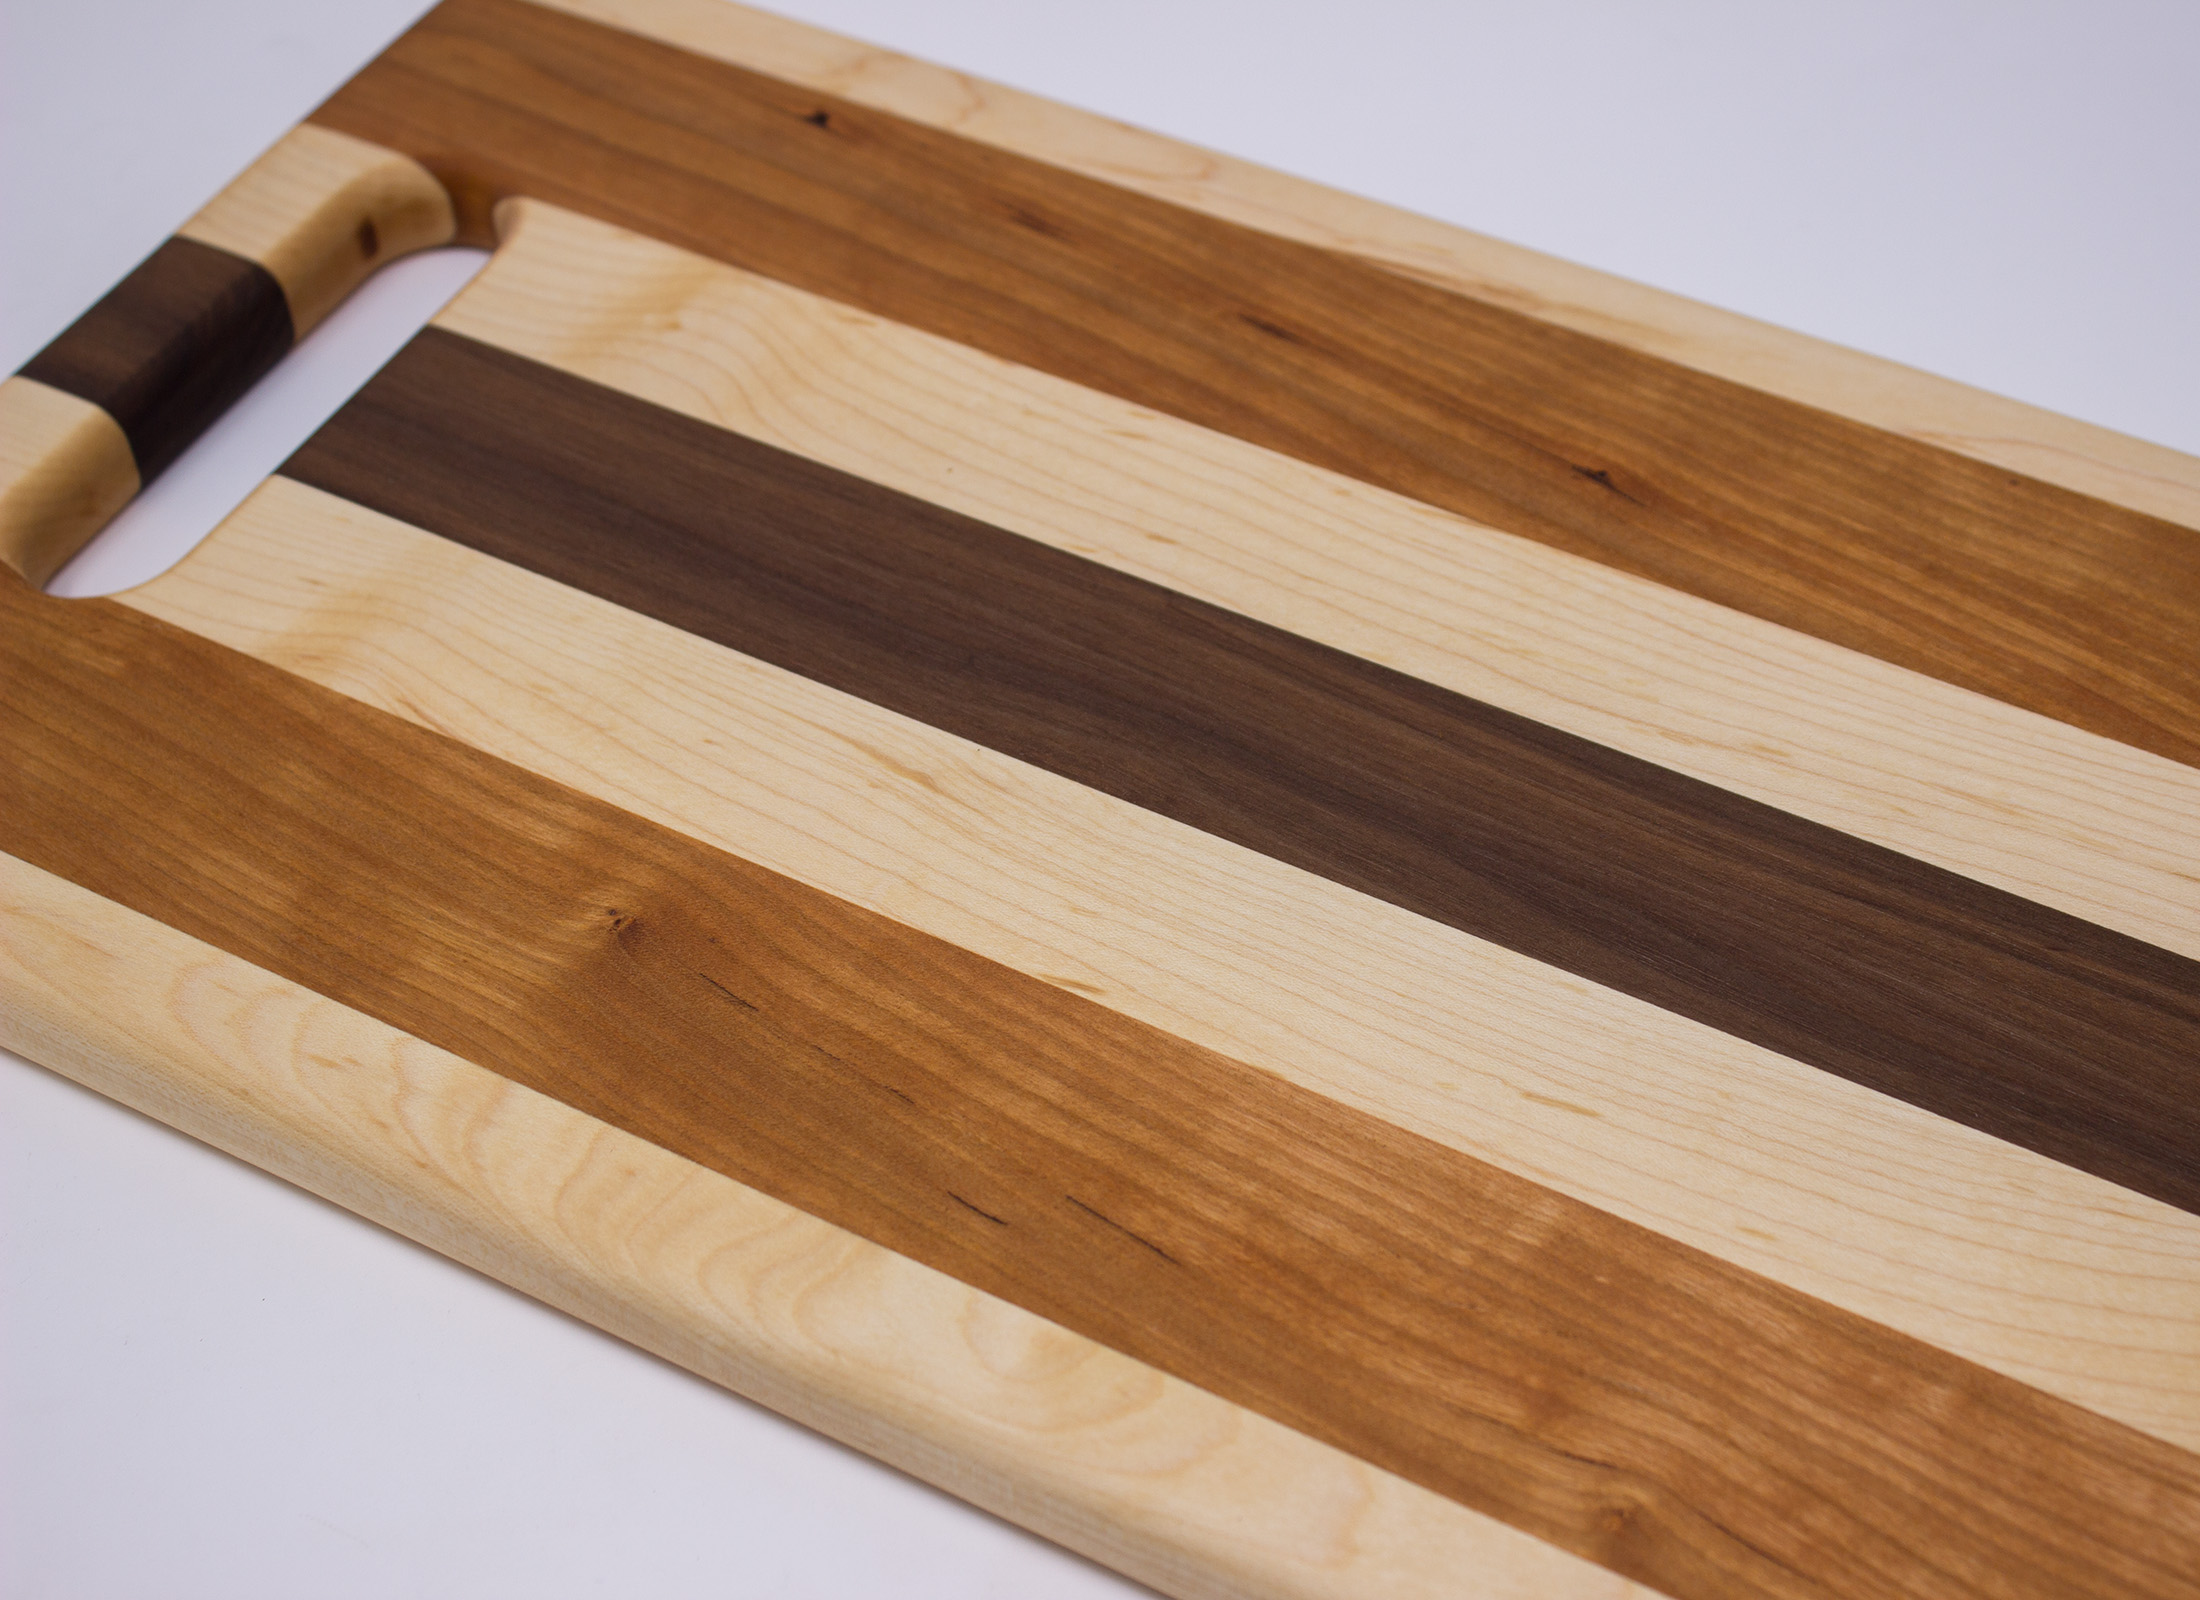 https://www.rockfordwoodcrafts.com/wp-content/uploads/Maple-Cherry-and-Walnut-Cutting-Board-with-Handle-Top-Close-Up.jpg